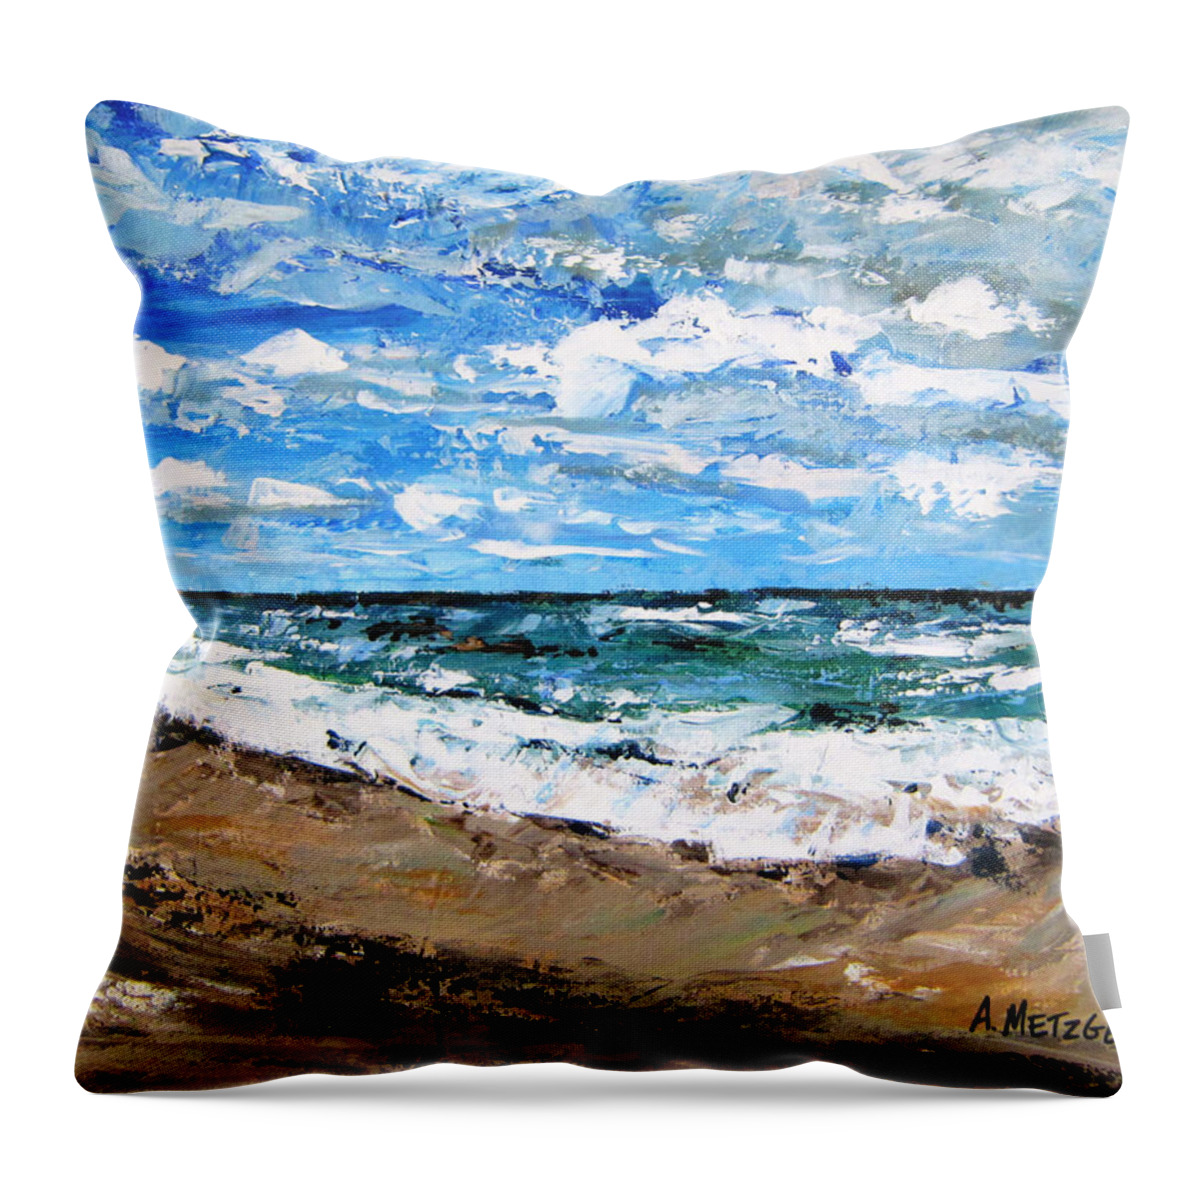 Ocean Throw Pillow featuring the painting Lake Worth Beach by Alan Metzger